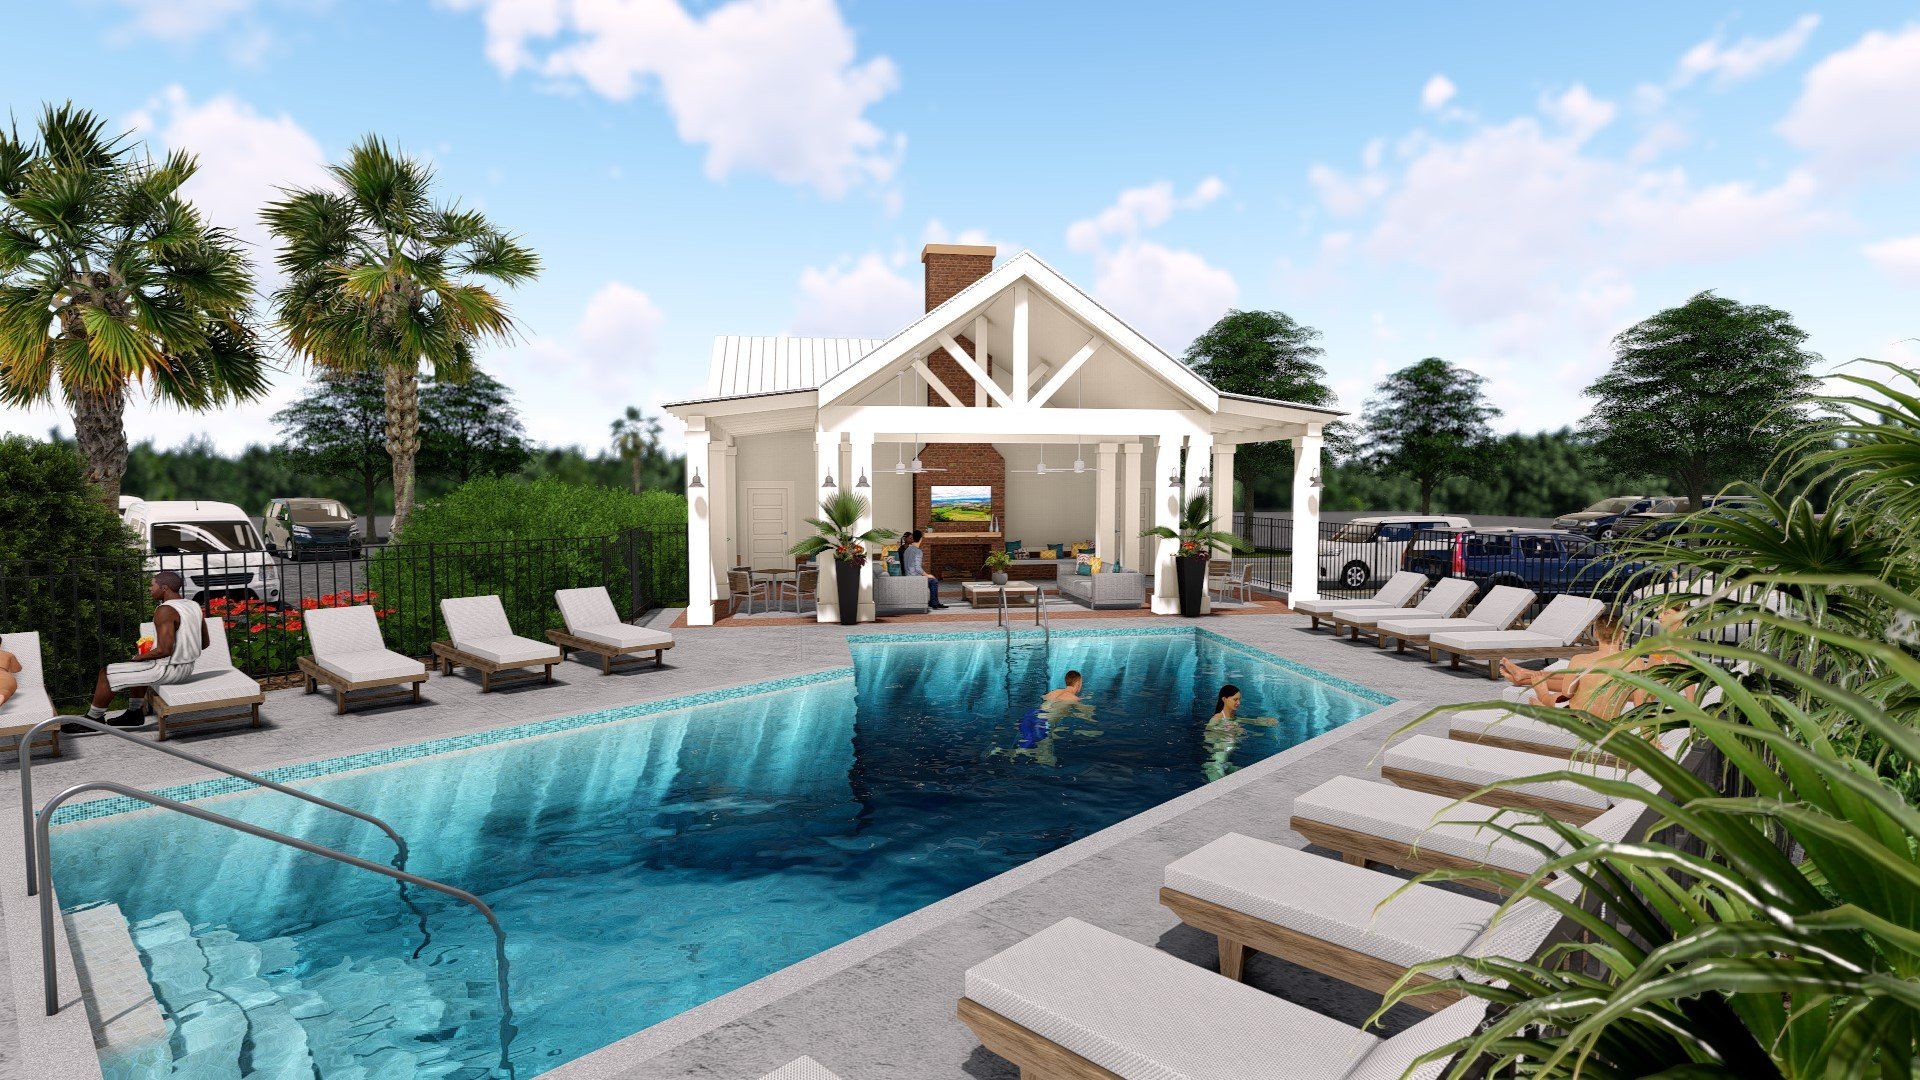 an artist 's impression of a swimming pool with a gazebo in the background .